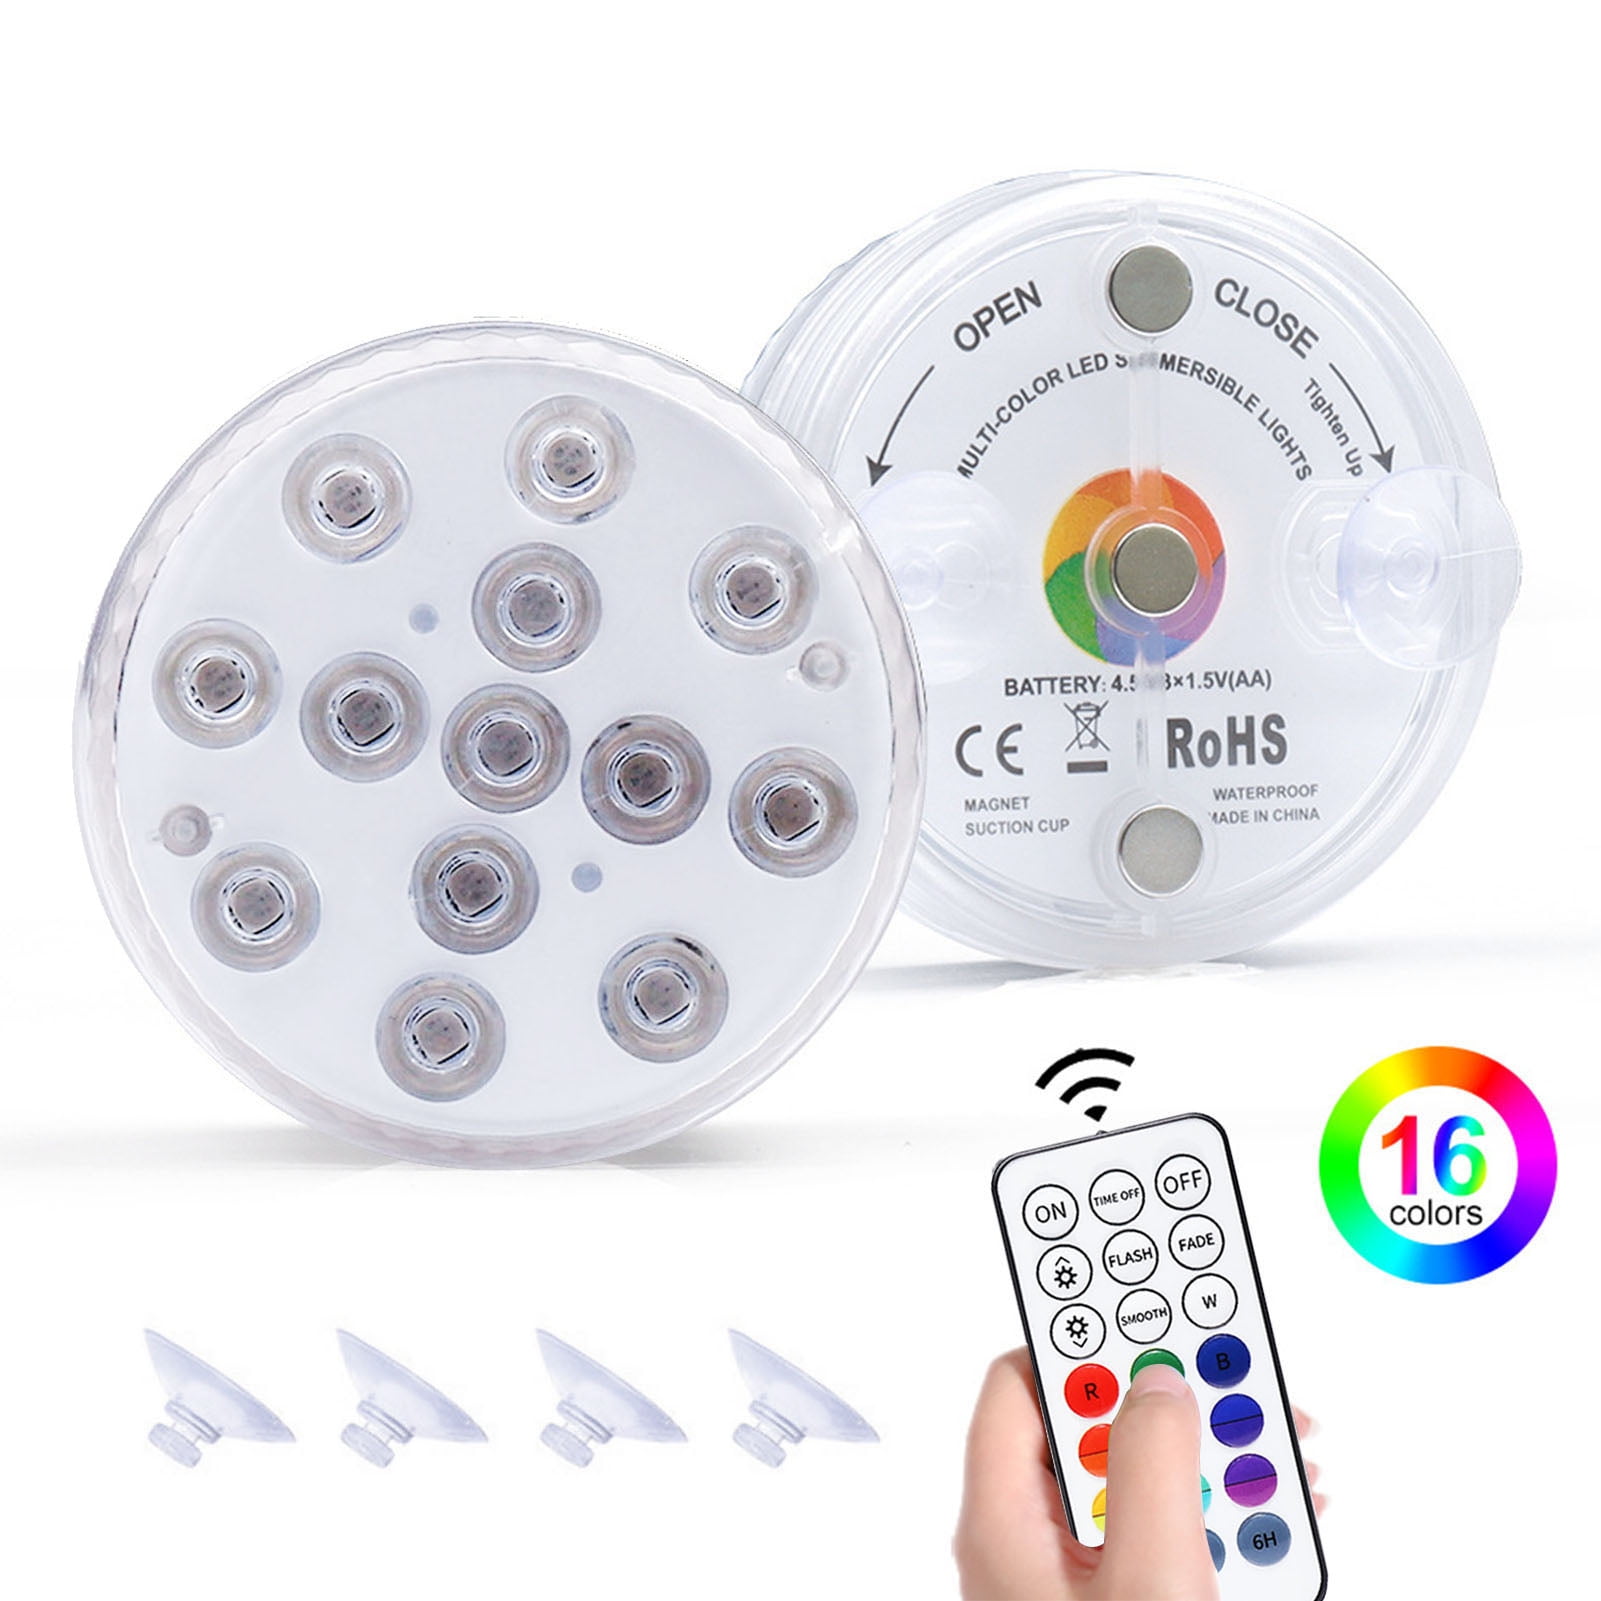 Fish Tank Bathroom 13LED USB Rechargeable Underwater Light Swimming Pool Light 7cm Diameter with RF Remote Control 3 Magnets 2 Suction Cups IP68 Diving Light for Swimming Pool Fountain